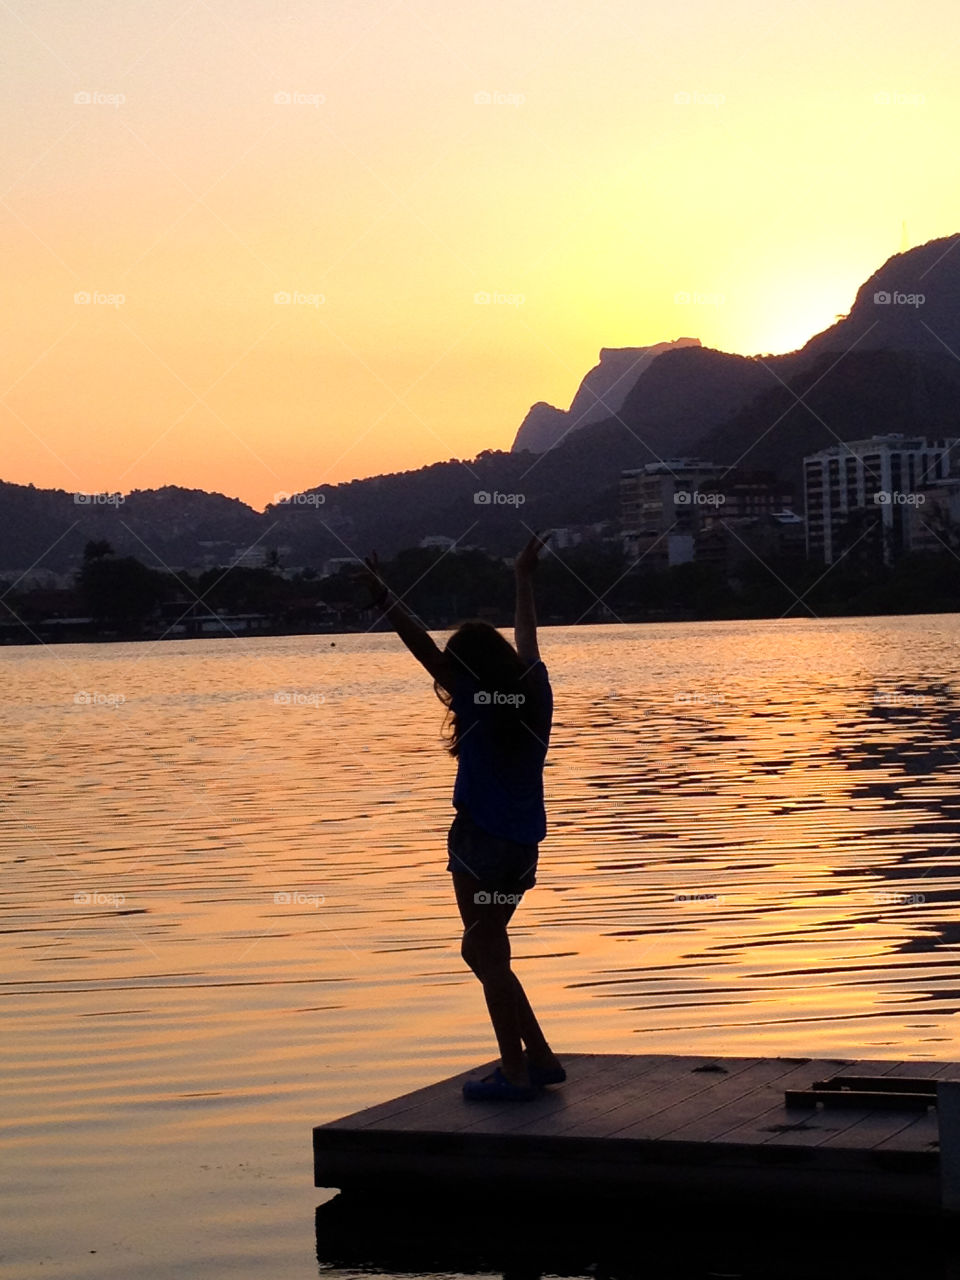 A girl with arms up by a lake in a beautiful sunset